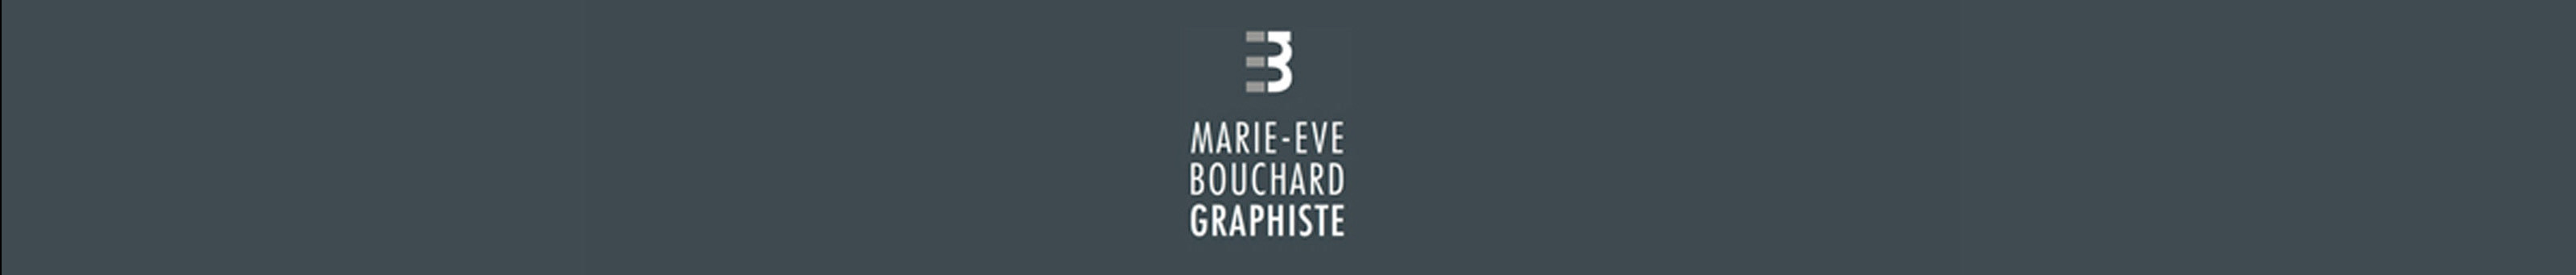 Marie-Eve Bouchard's profile banner